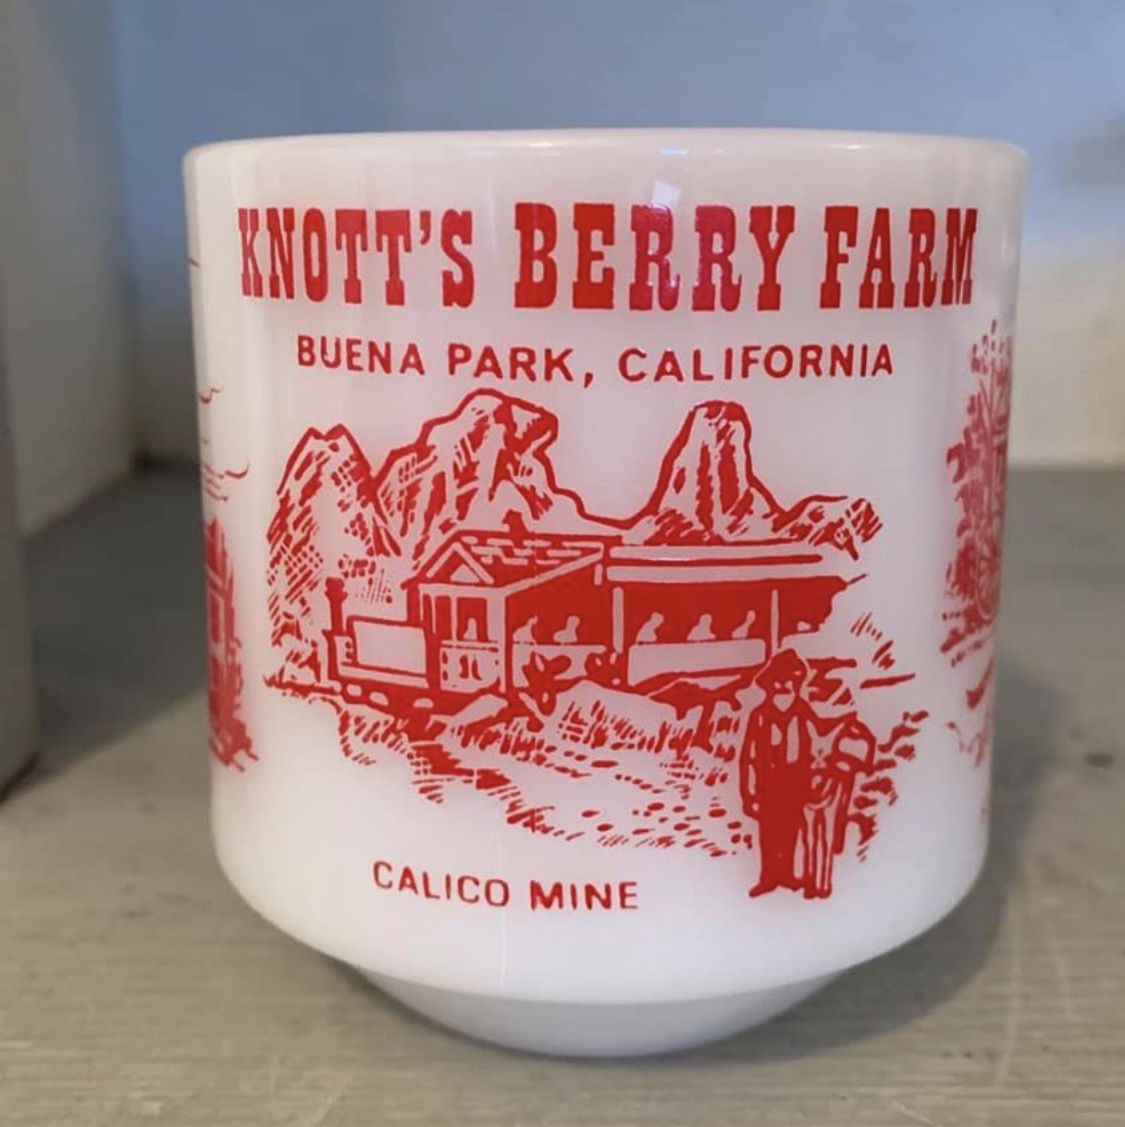 Vintage Federal Glass Knotts Berry Farm souvenir milkglass mug. Paint detail in red is bright and shiny